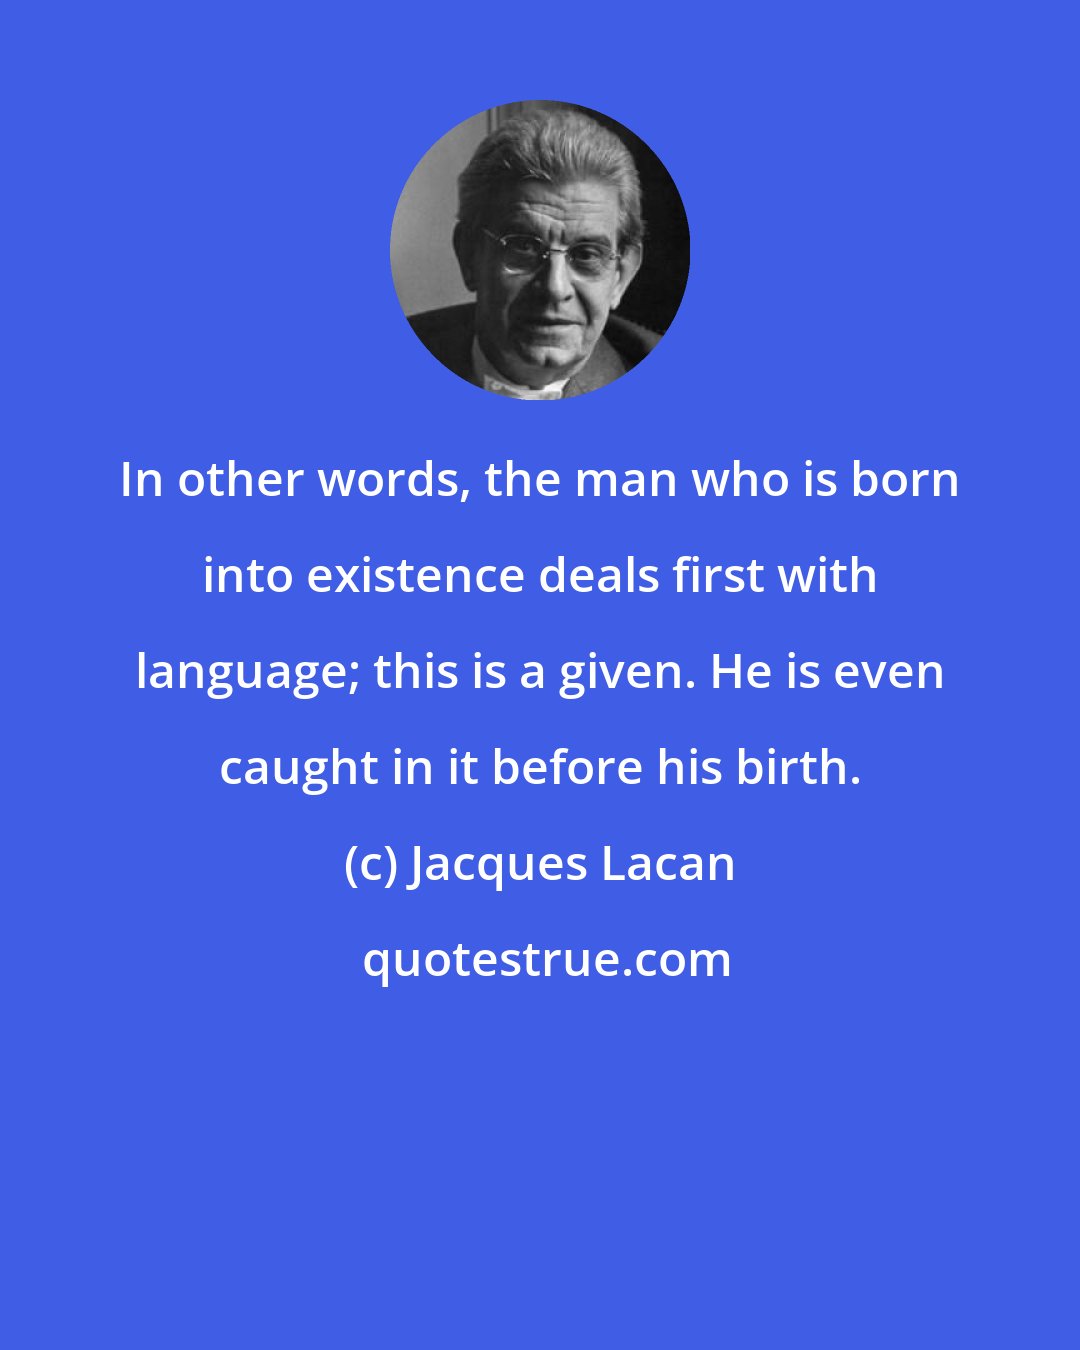 Jacques Lacan: In other words, the man who is born into existence deals first with language; this is a given. He is even caught in it before his birth.